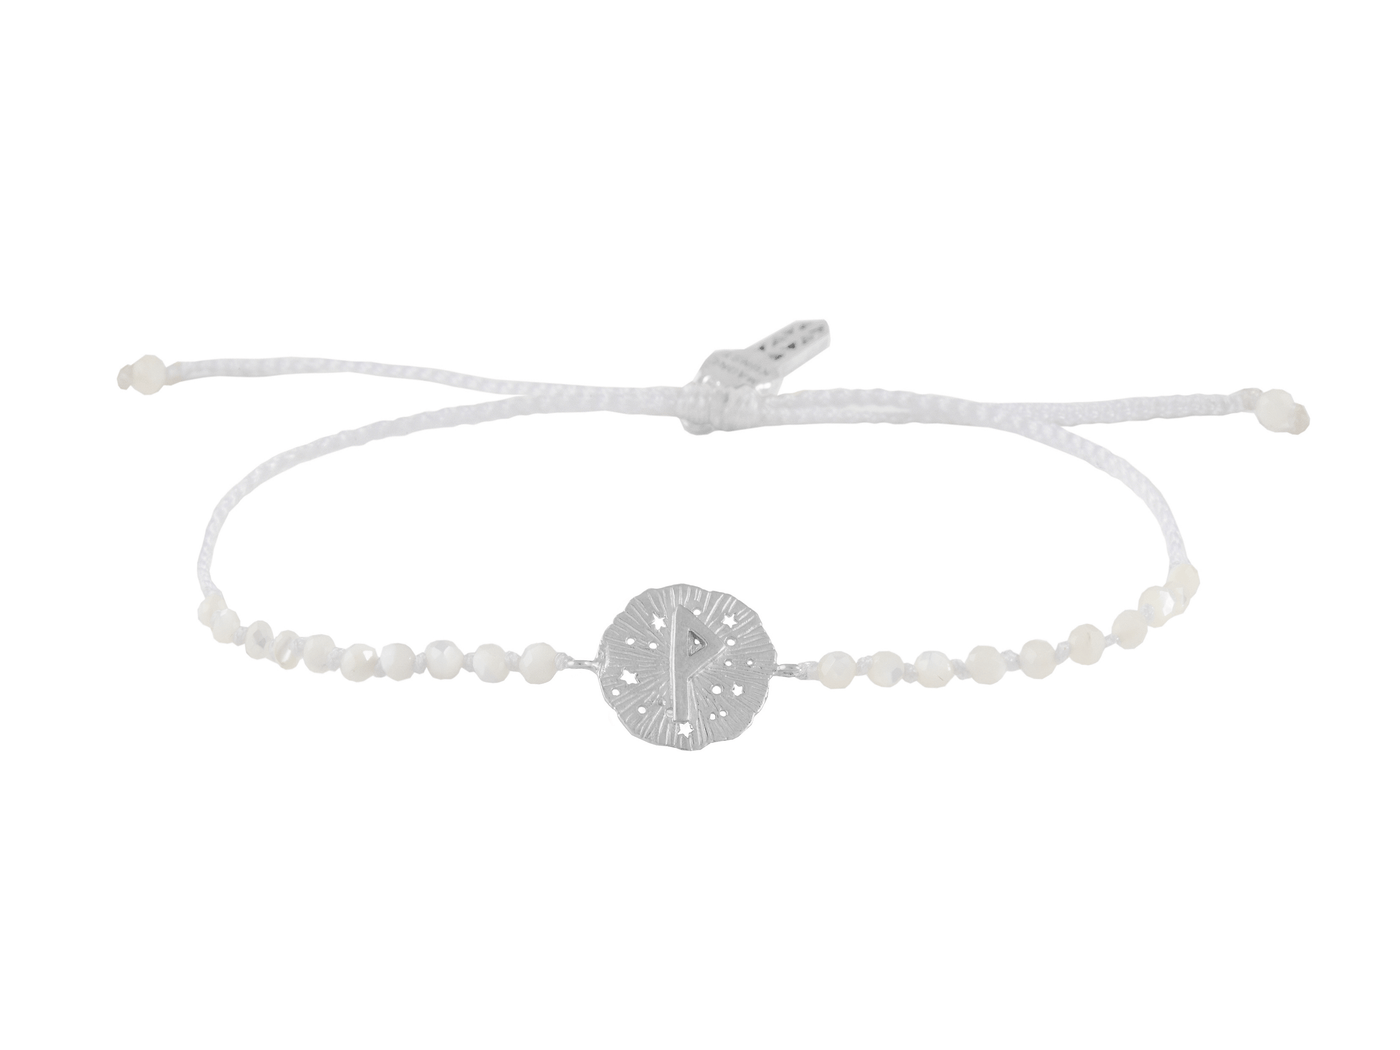 Runic medallion amulet Wunjo bracelet with beads. Silver